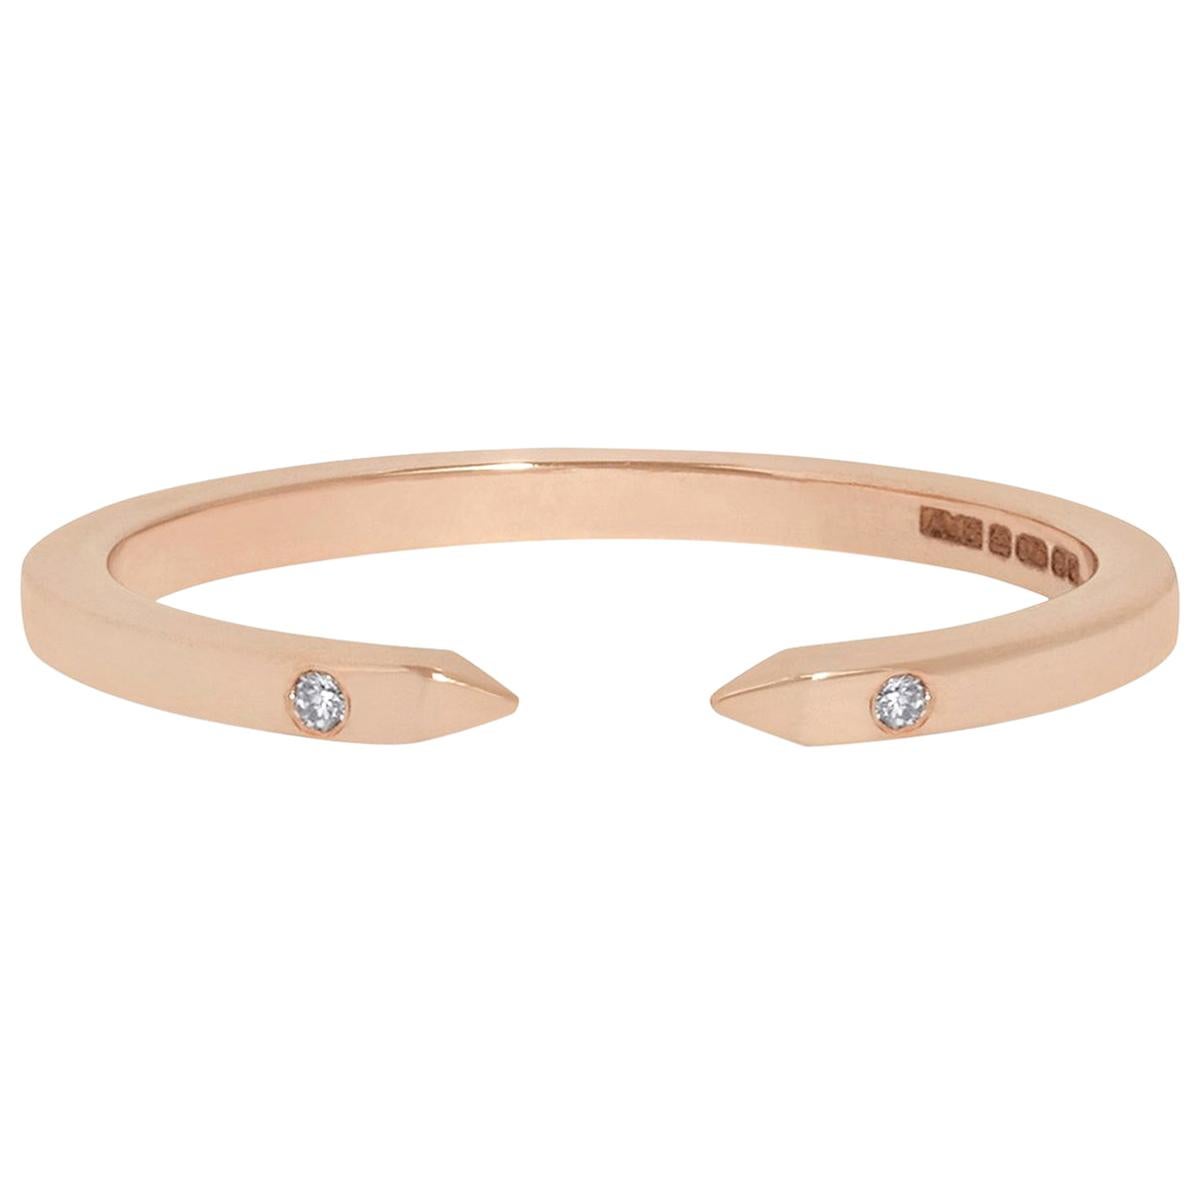 Slim Open Ring in 18 Karat Rose Gold with White Diamonds by Allison Bryan For Sale